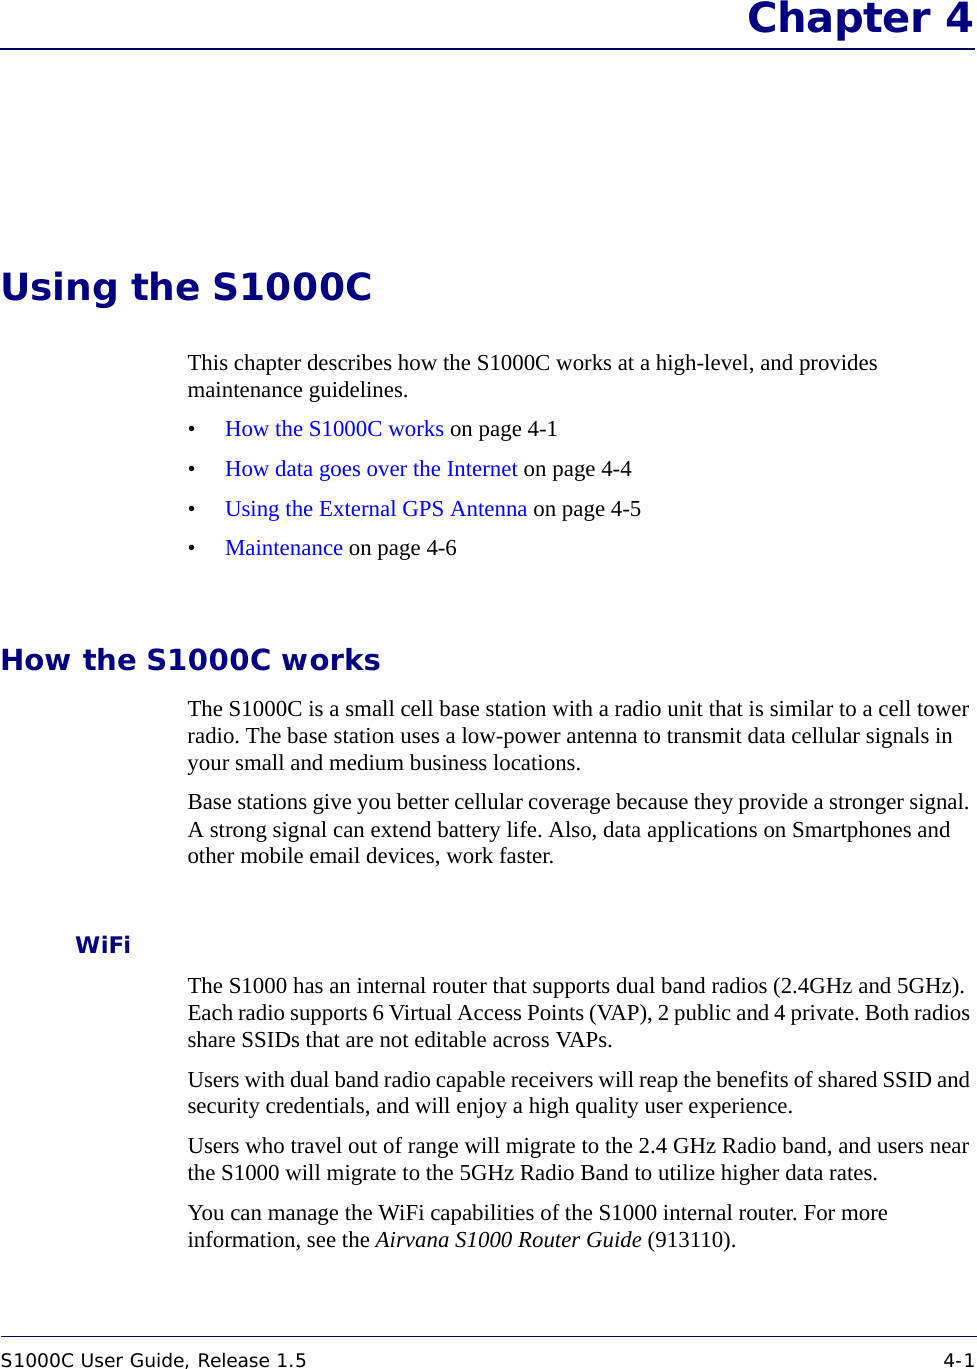 S1000C User Guide, Release 1.5 4-1DRAFT Chapter 4Using the S1000CThis chapter describes how the S1000C works at a high-level, and provides maintenance guidelines.•How the S1000C works on page 4-1•How data goes over the Internet on page 4-4•Using the External GPS Antenna on page 4-5•Maintenance on page 4-6How the S1000C worksThe S1000C is a small cell base station with a radio unit that is similar to a cell tower radio. The base station uses a low-power antenna to transmit data cellular signals in your small and medium business locations. Base stations give you better cellular coverage because they provide a stronger signal. A strong signal can extend battery life. Also, data applications on Smartphones and other mobile email devices, work faster. WiFiThe S1000 has an internal router that supports dual band radios (2.4GHz and 5GHz). Each radio supports 6 Virtual Access Points (VAP), 2 public and 4 private. Both radios share SSIDs that are not editable across VAPs. Users with dual band radio capable receivers will reap the benefits of shared SSID and security credentials, and will enjoy a high quality user experience.Users who travel out of range will migrate to the 2.4 GHz Radio band, and users near the S1000 will migrate to the 5GHz Radio Band to utilize higher data rates.You can manage the WiFi capabilities of the S1000 internal router. For more information, see the Airvana S1000 Router Guide (913110).